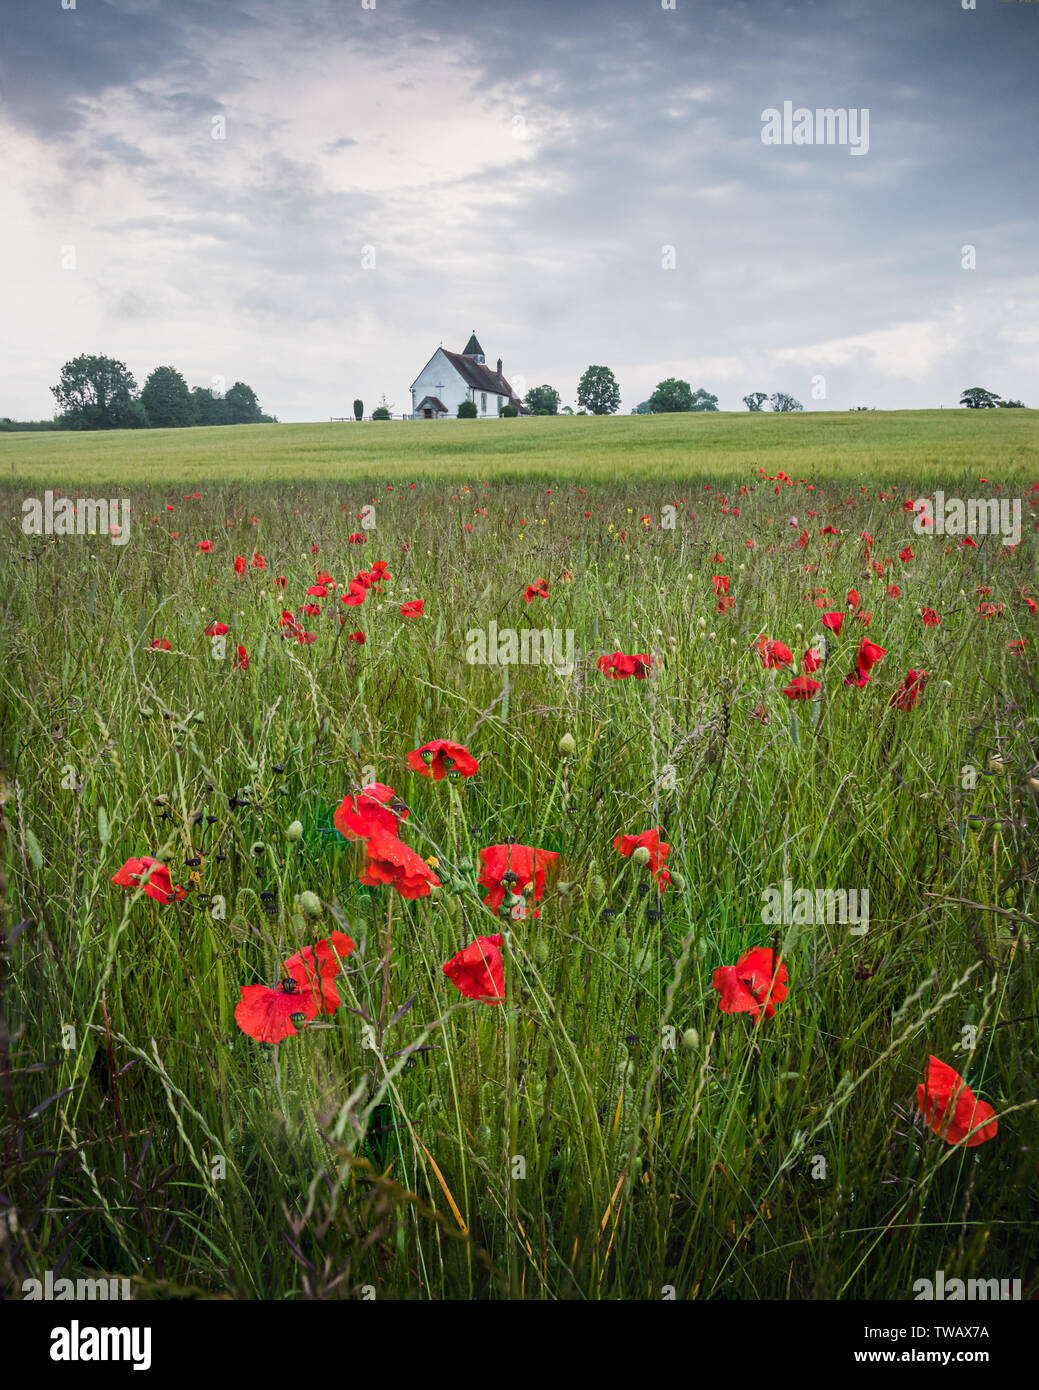 Red poppies and green surrounding an old english church, St Hubert's church in Idsworth, Hampshire Stock Photo